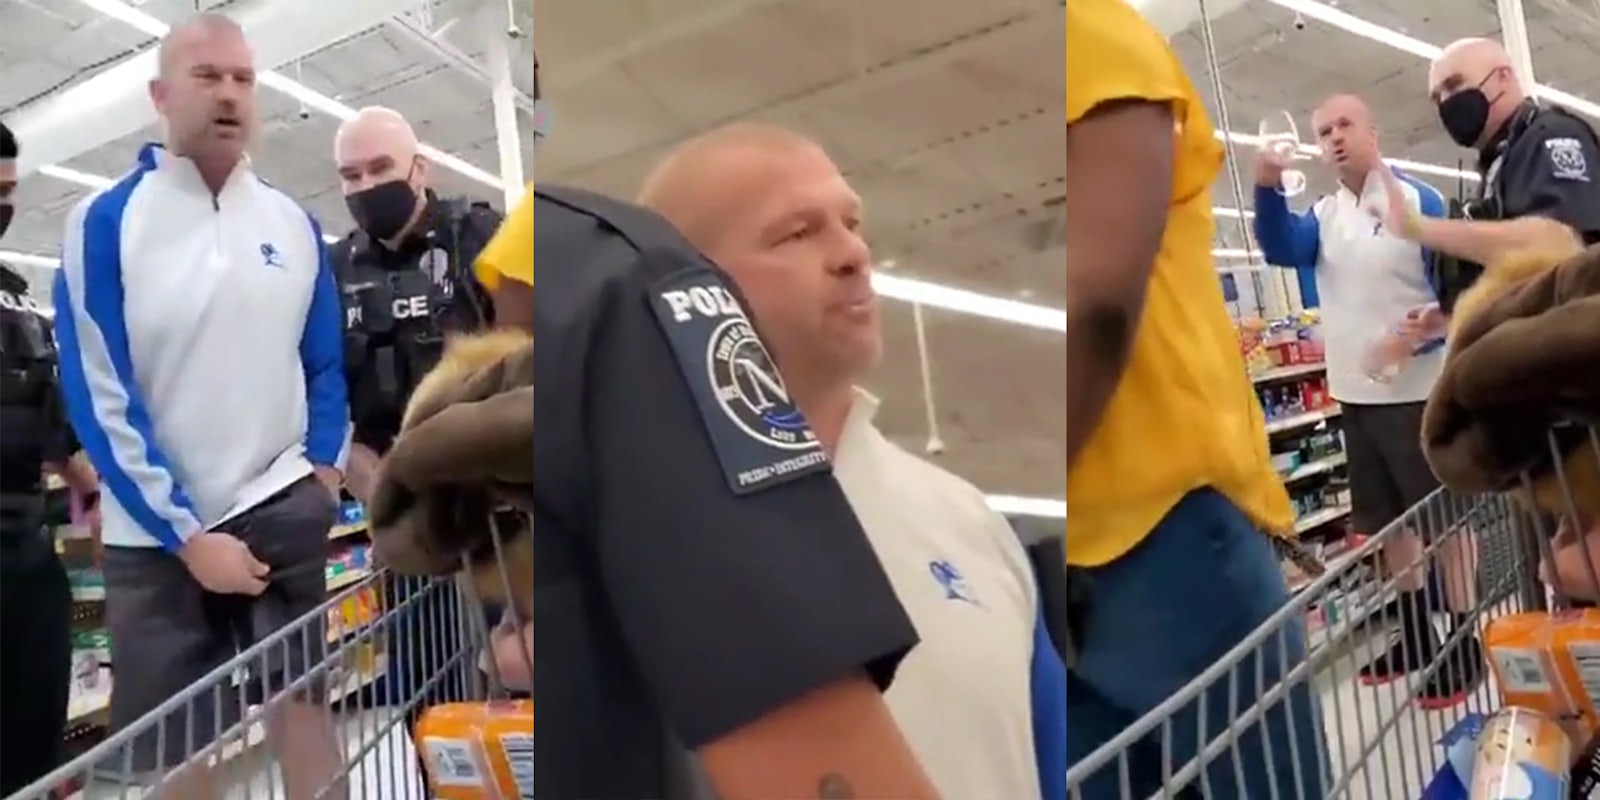 white man accuses Black Wal-Mart manager of being racist for asking him to wear a mask